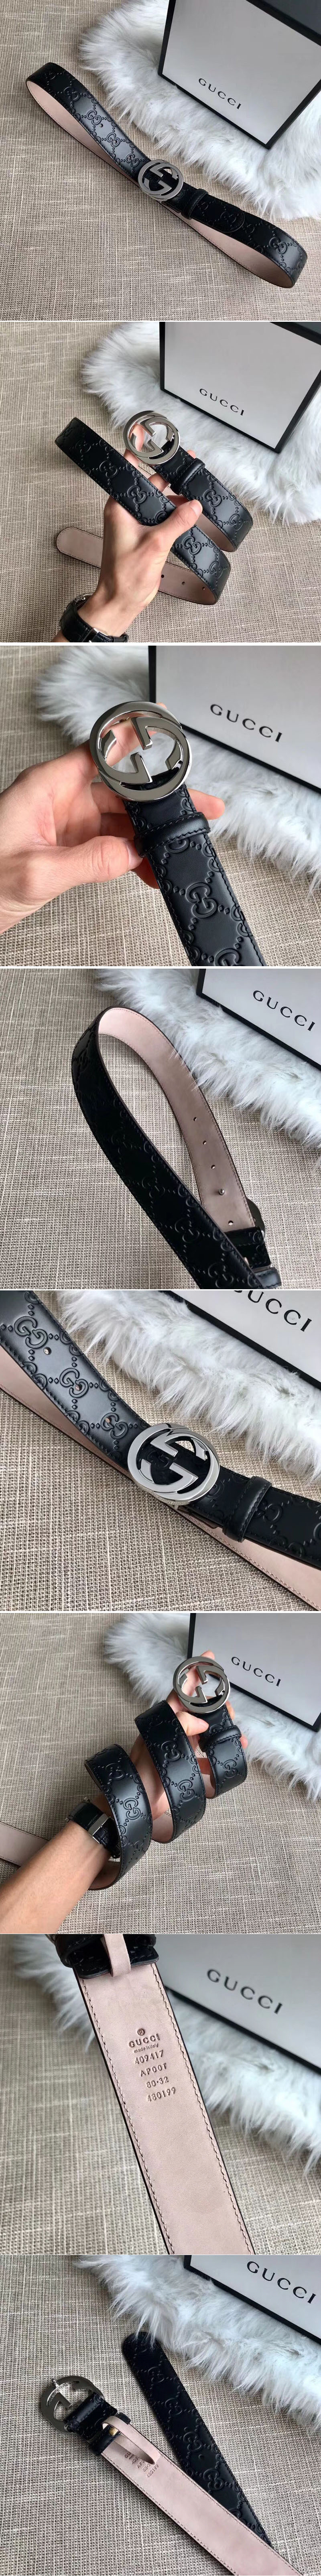 Replica Gucci 409417 35mm Signature leather belt Black Leather Silver G buckle